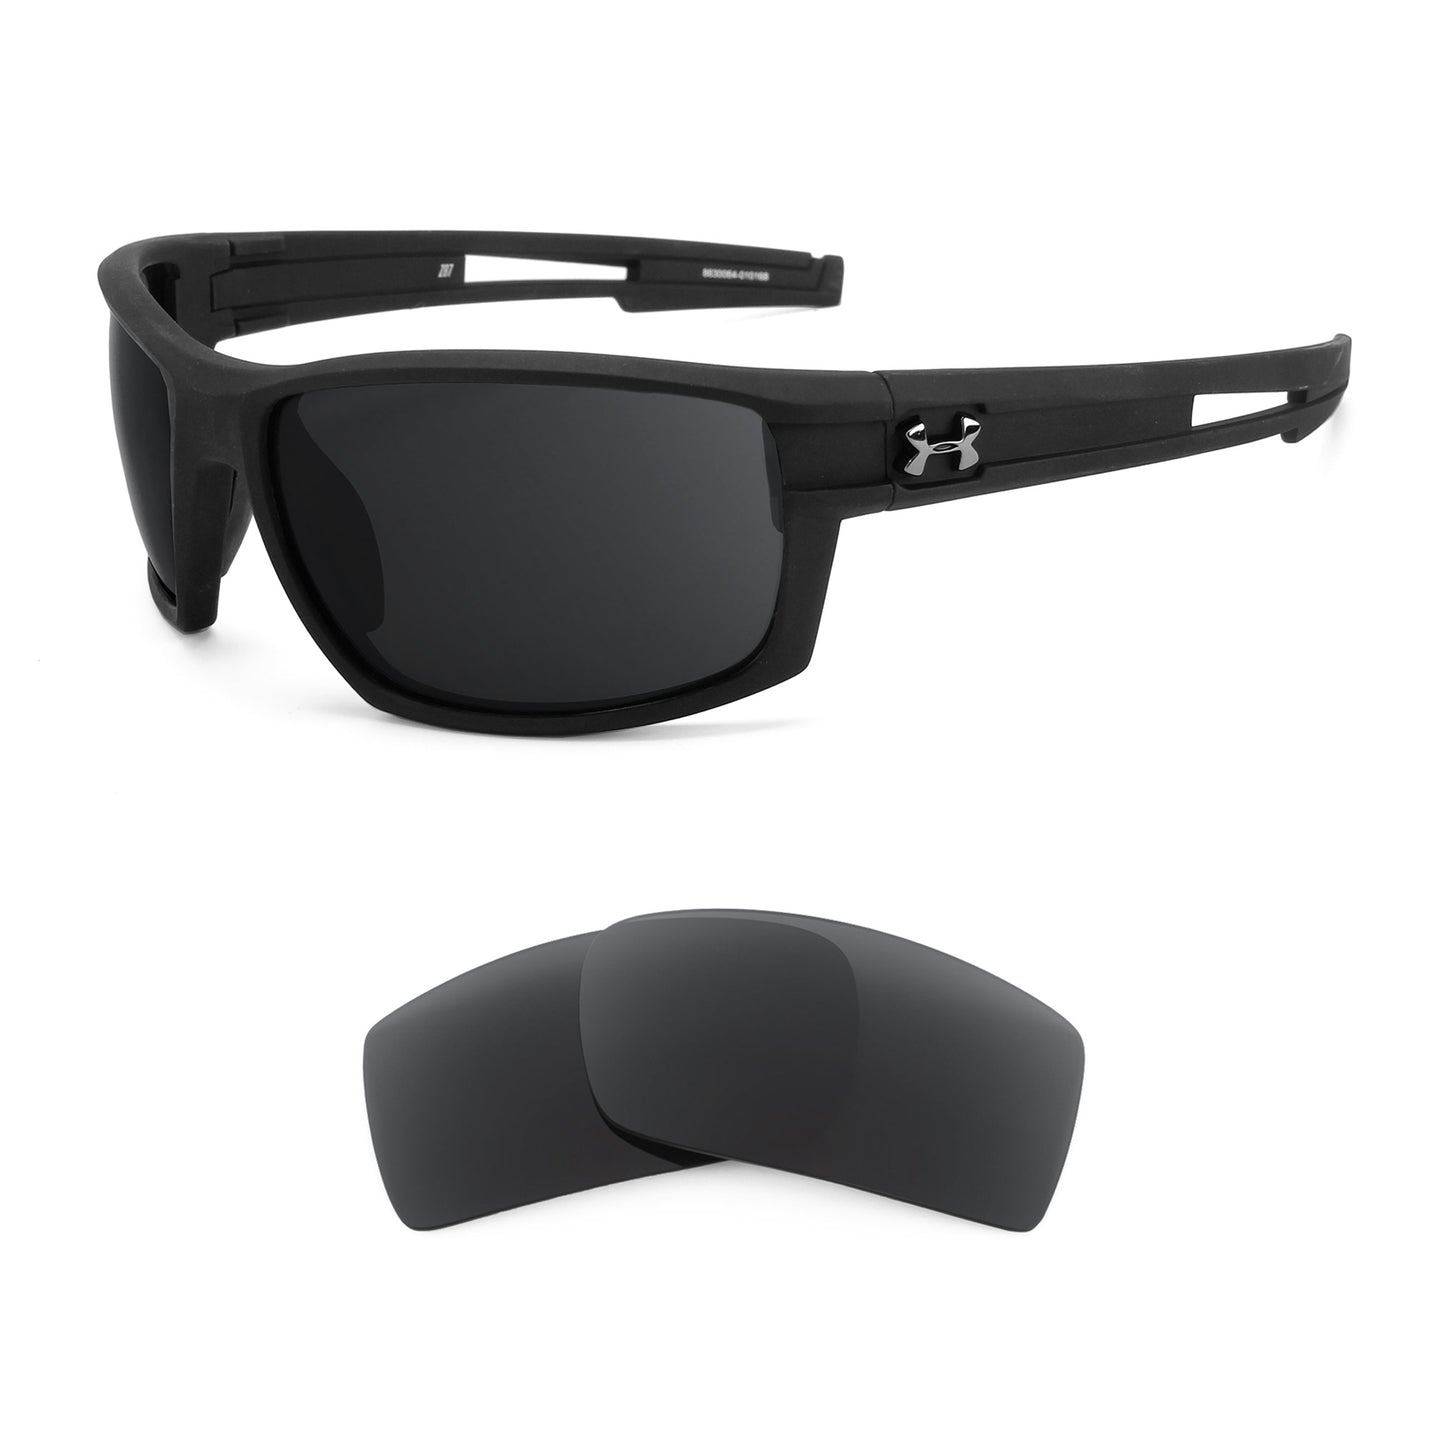 Under Armour Captain sunglasses with replacement lenses